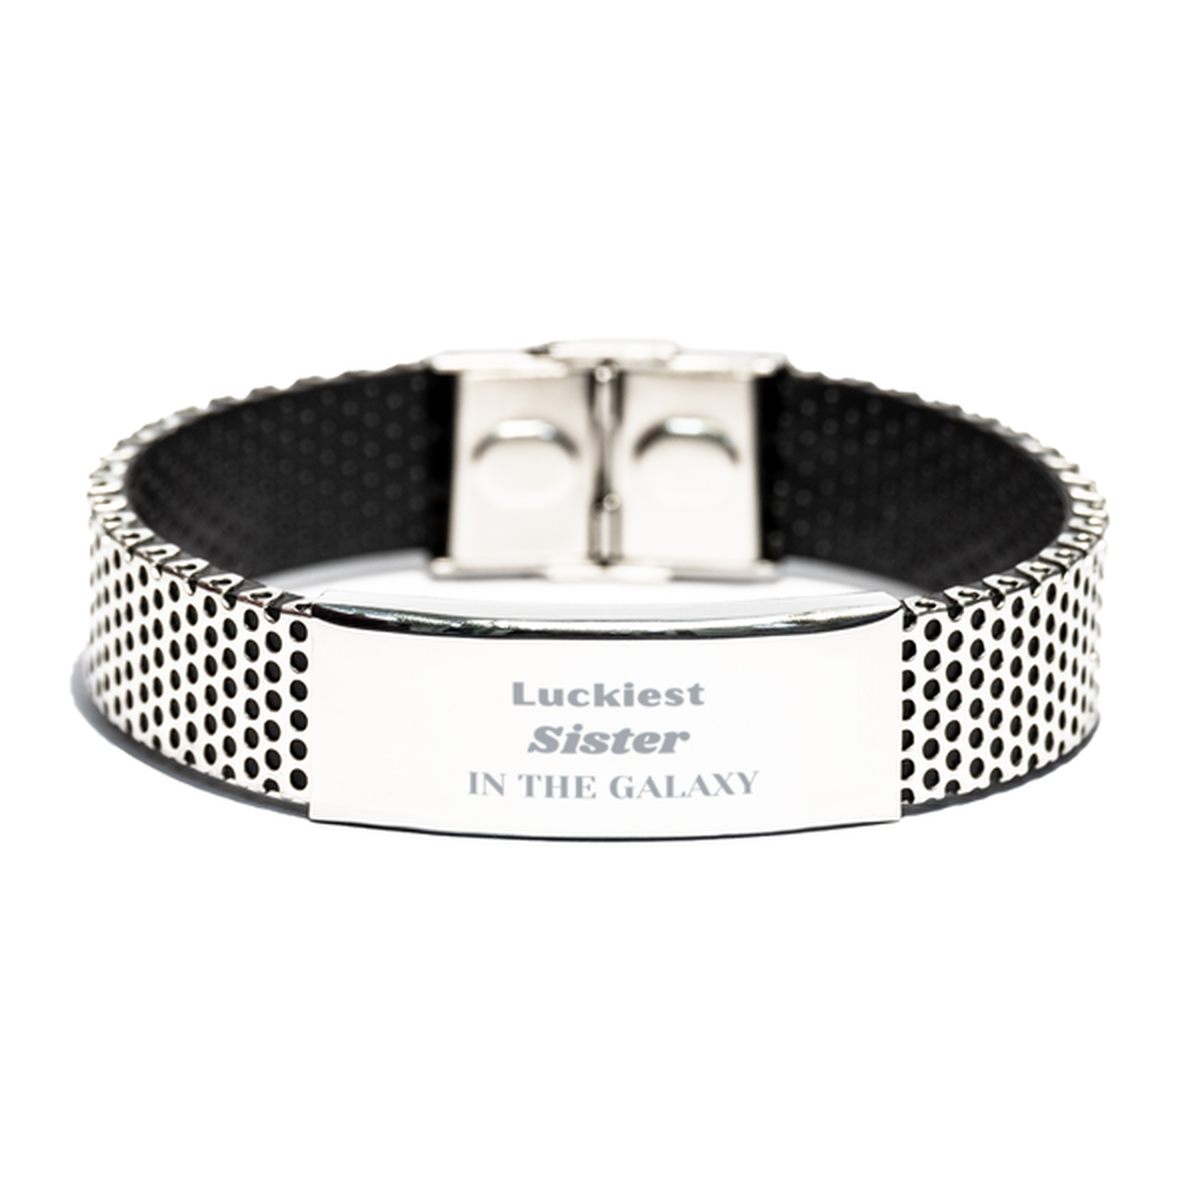 Luckiest Sister in the Galaxy, To My Sister Engraved Gifts, Christmas Sister Stainless Steel Bracelet Gifts, X-mas Birthday Unique Gifts For Sister Men Women